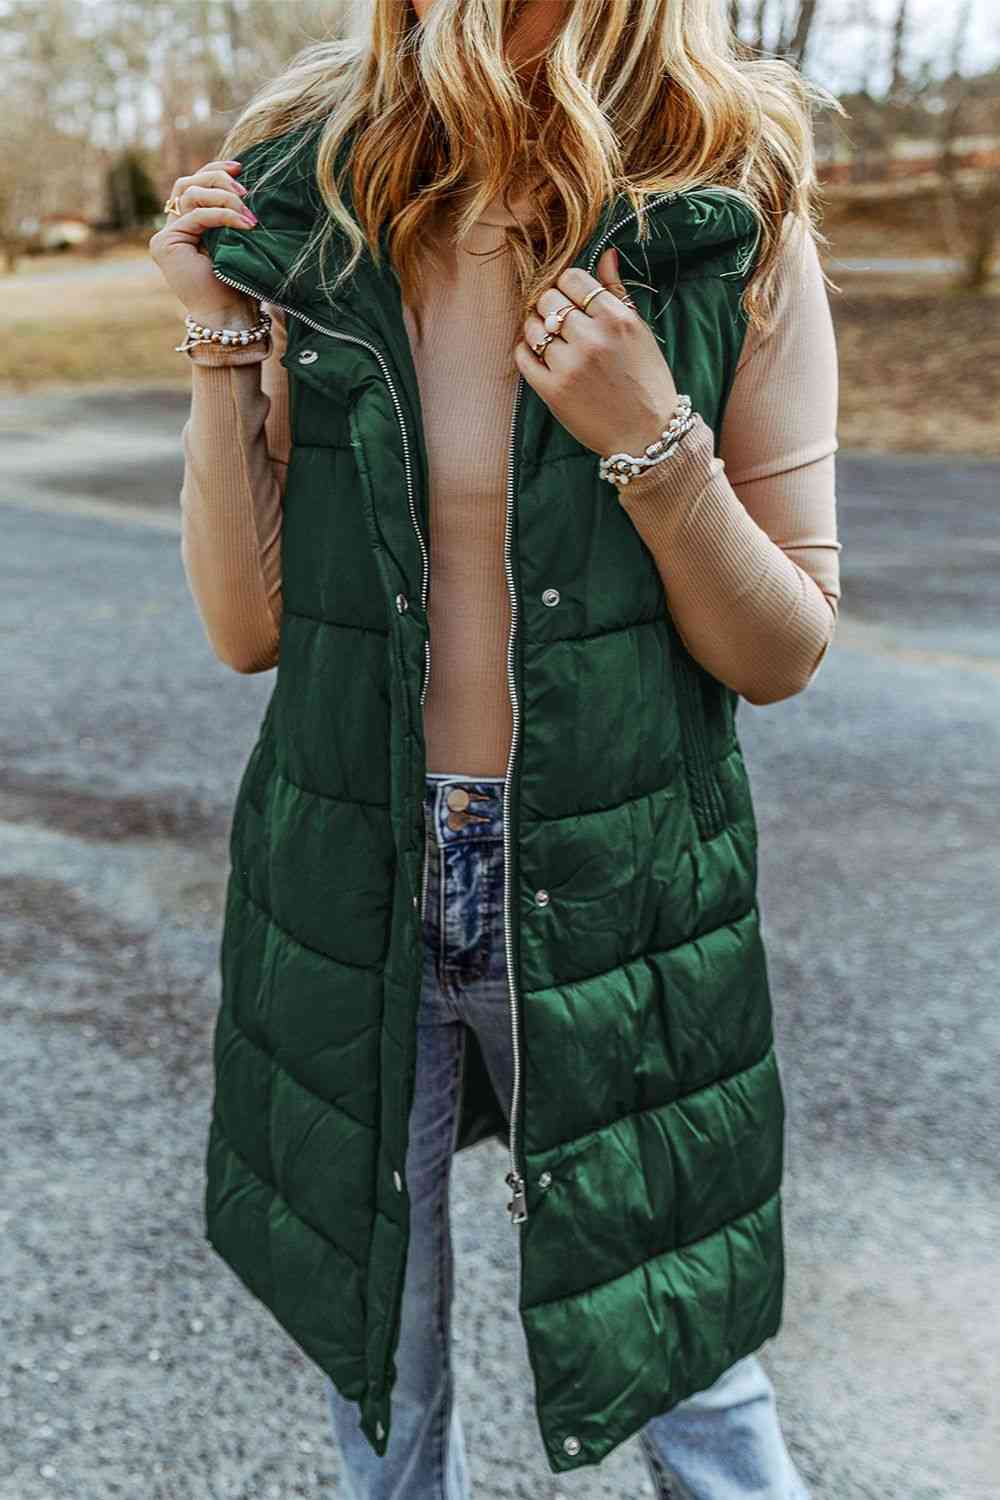 Longline Hooded Sleeveless Puffer Vest - The Teal Antler Boutique